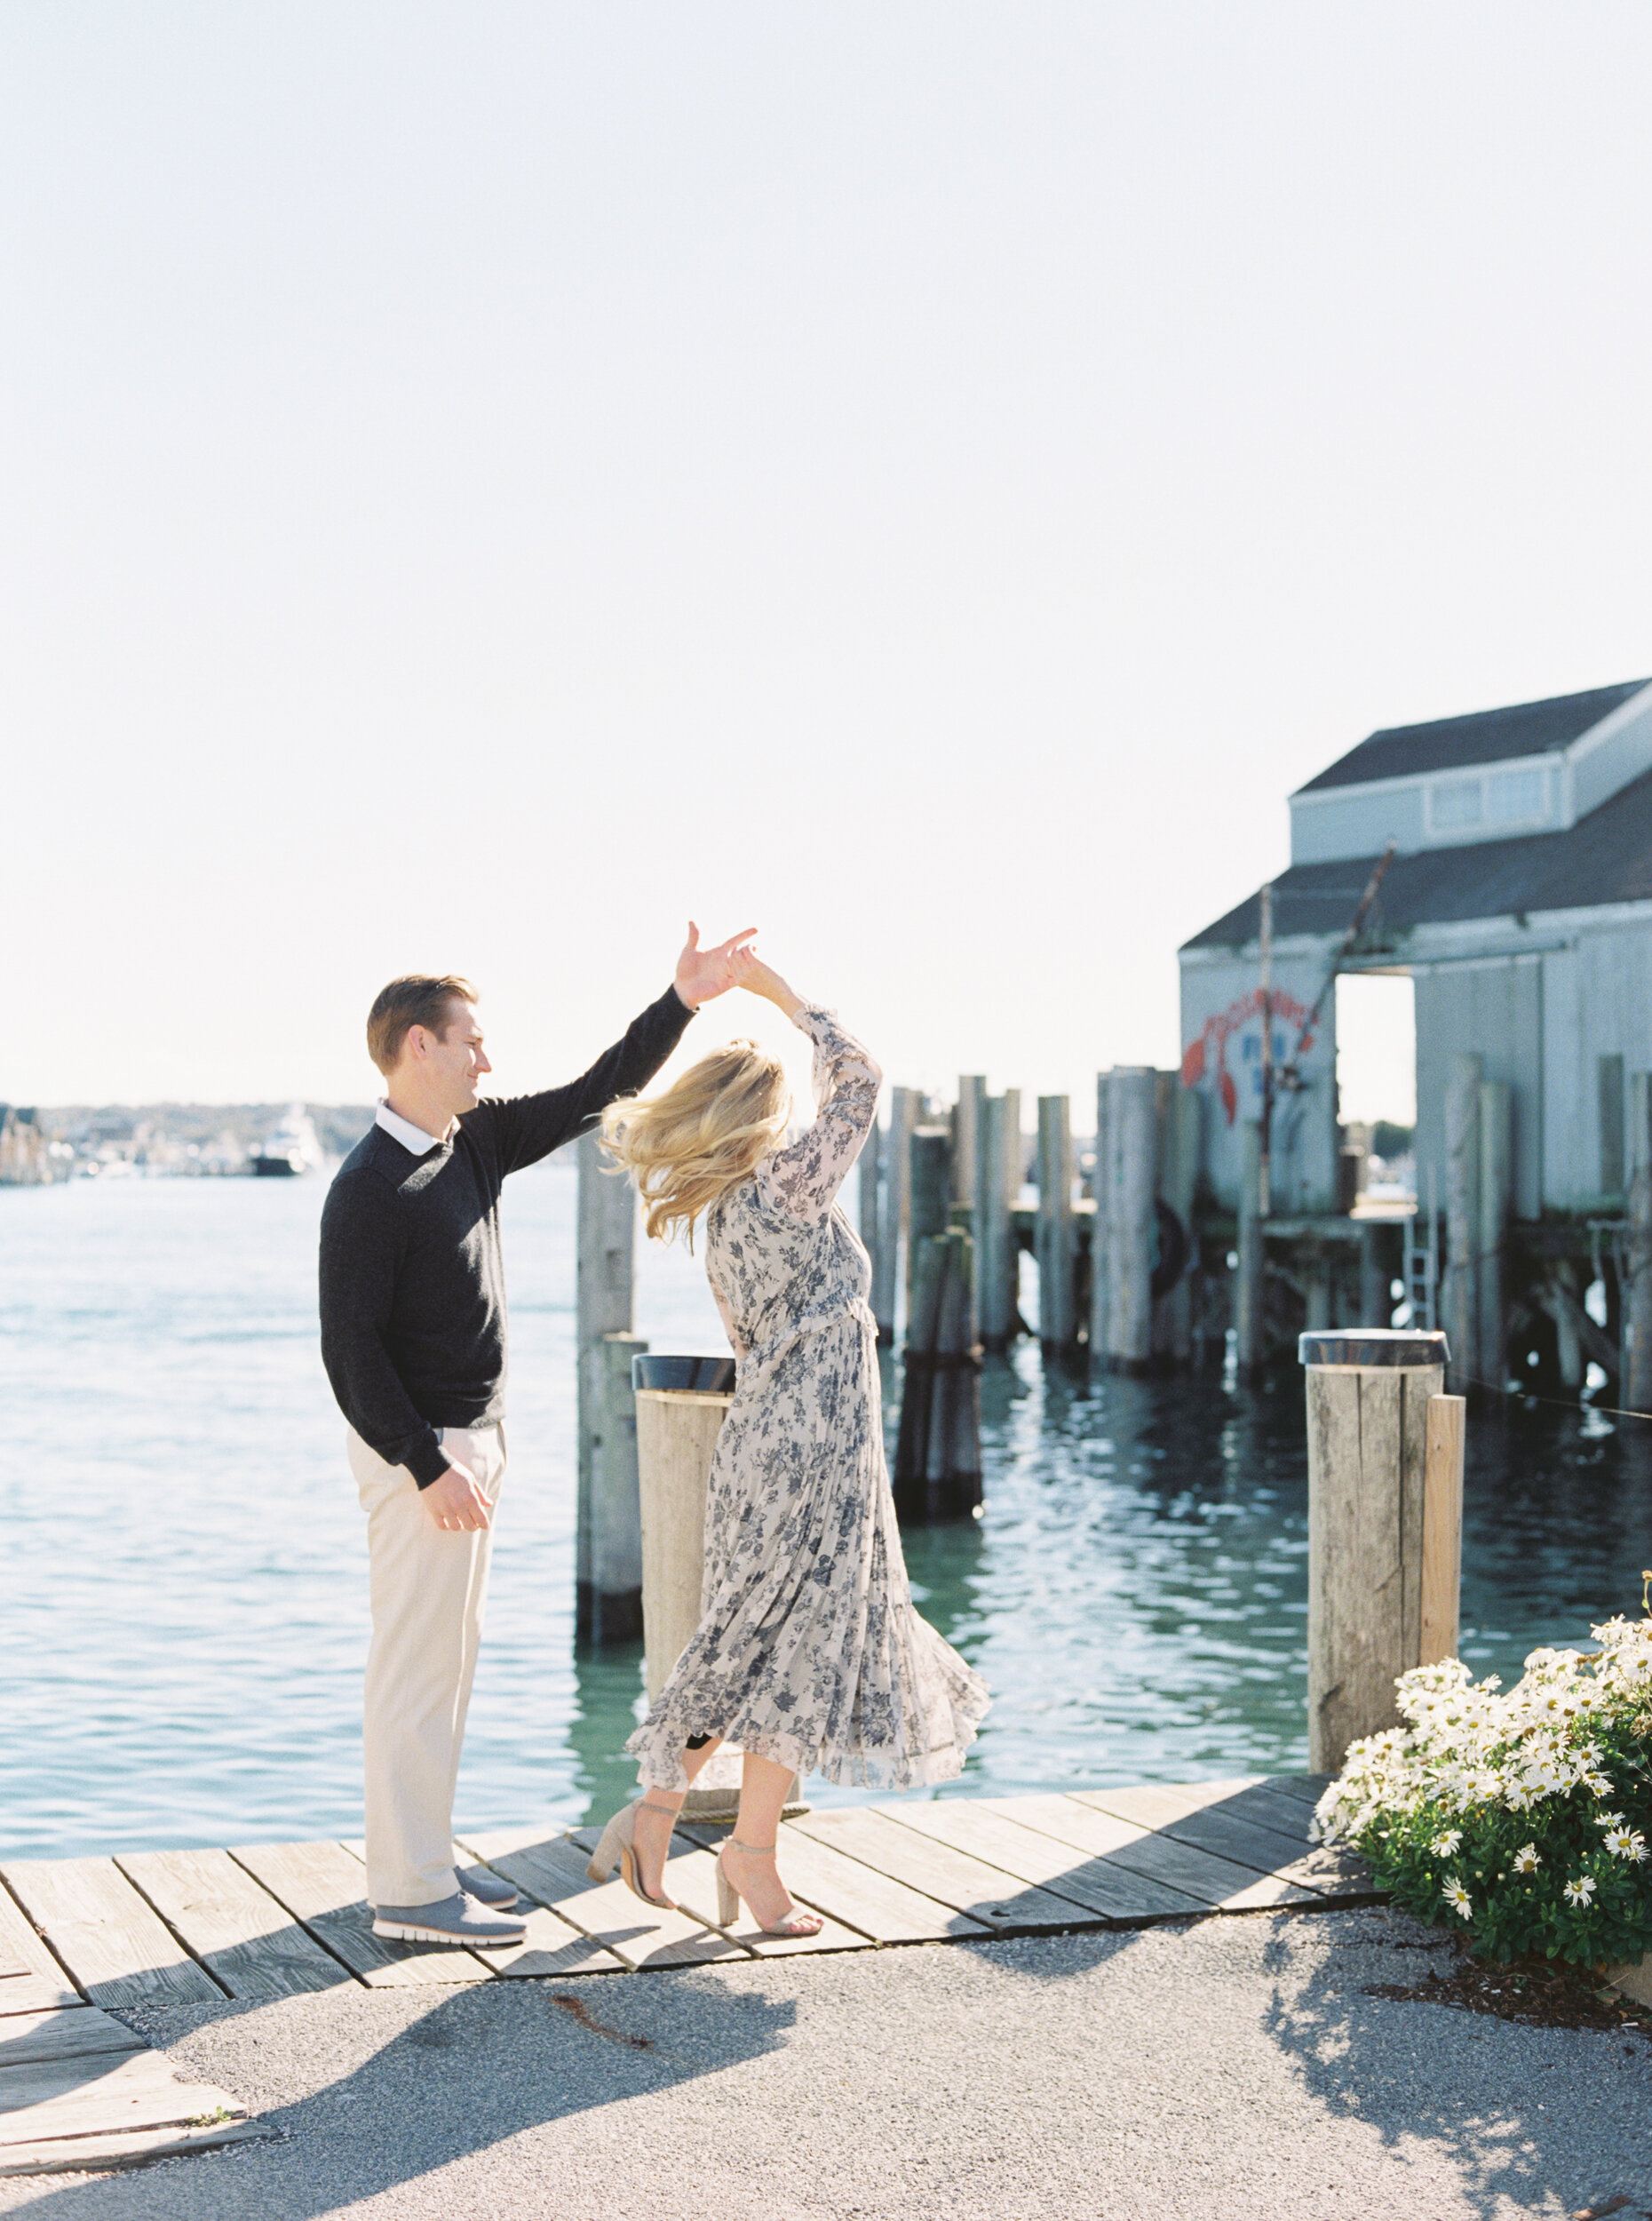 Engagement Session Overlooking the Water in Montauk, NY